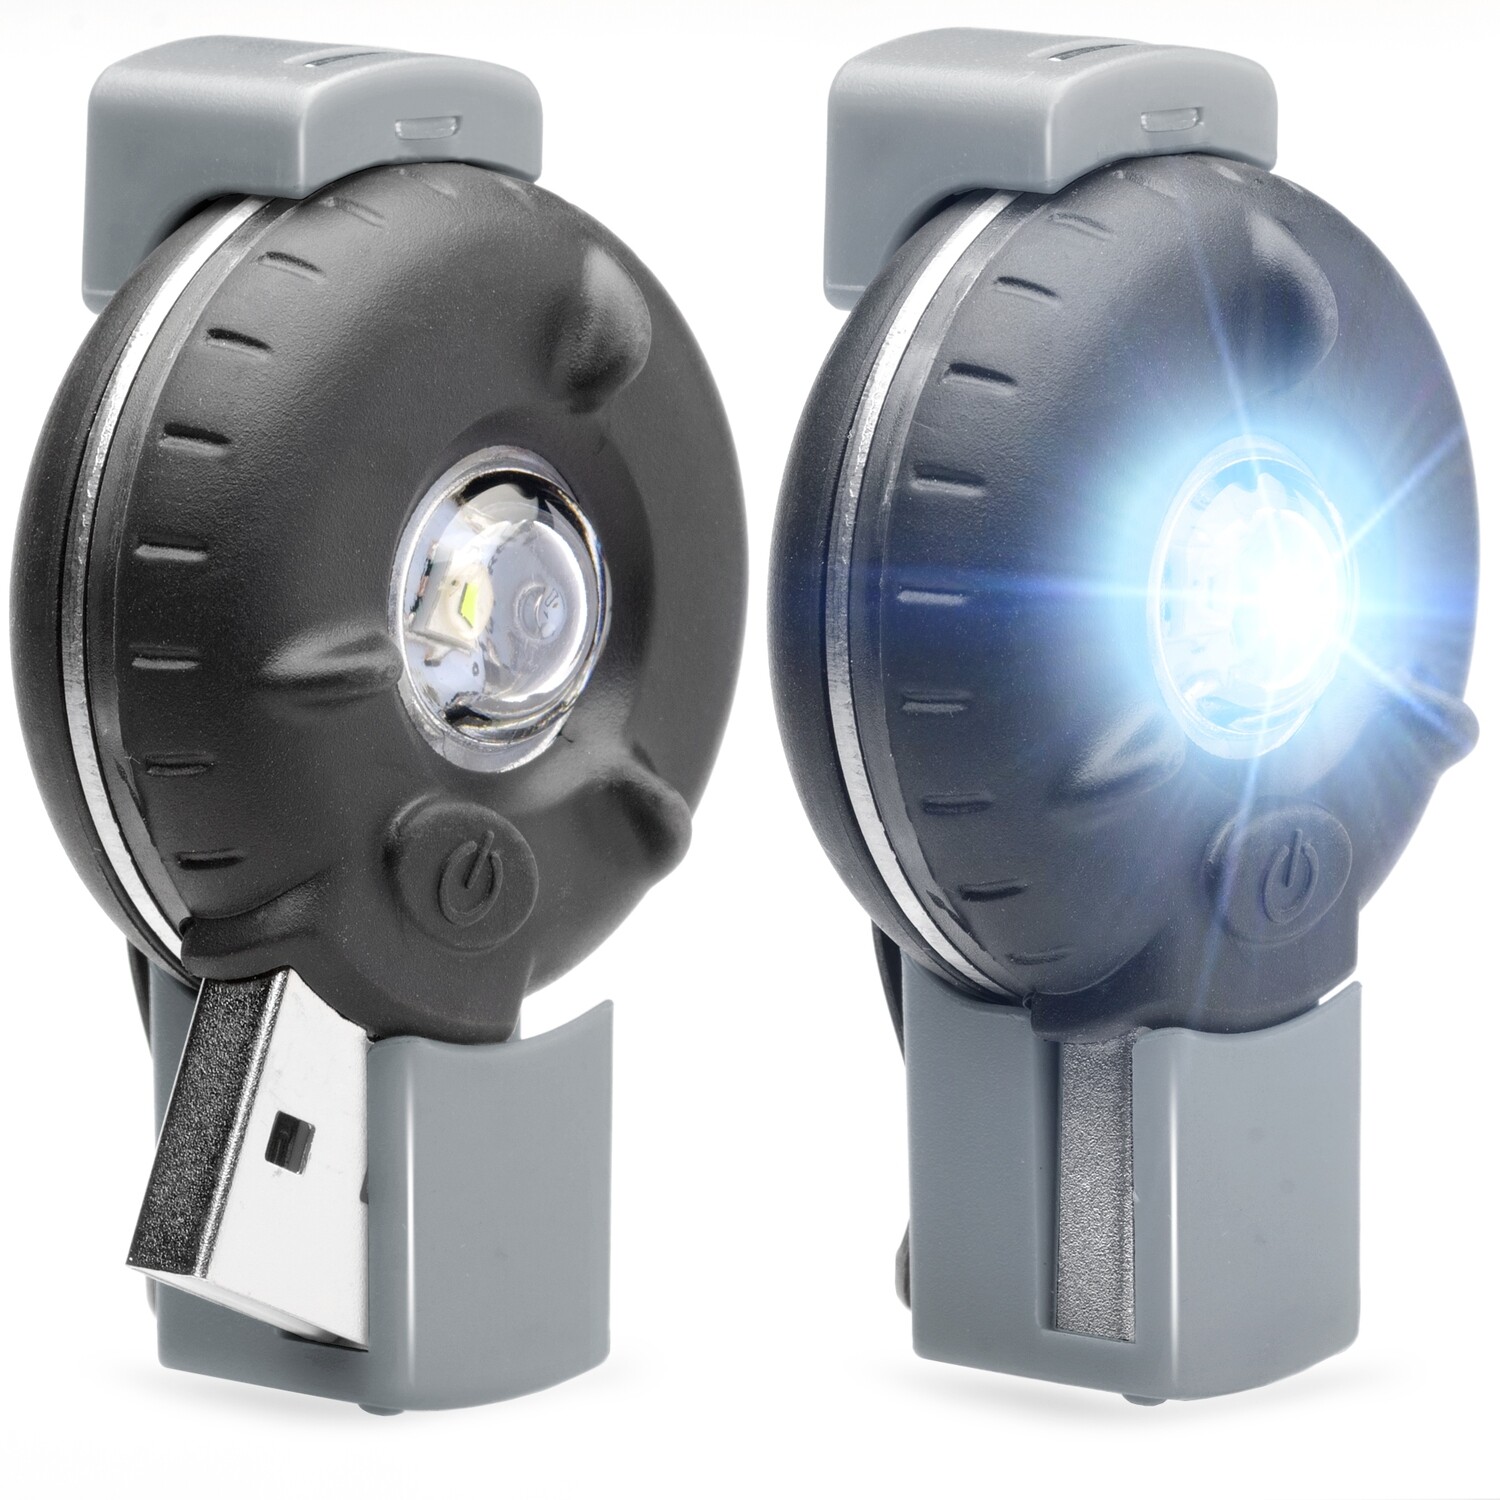 Bkin Smart Motion-Activated LED Personal Safety Light (2 Pack), Gray